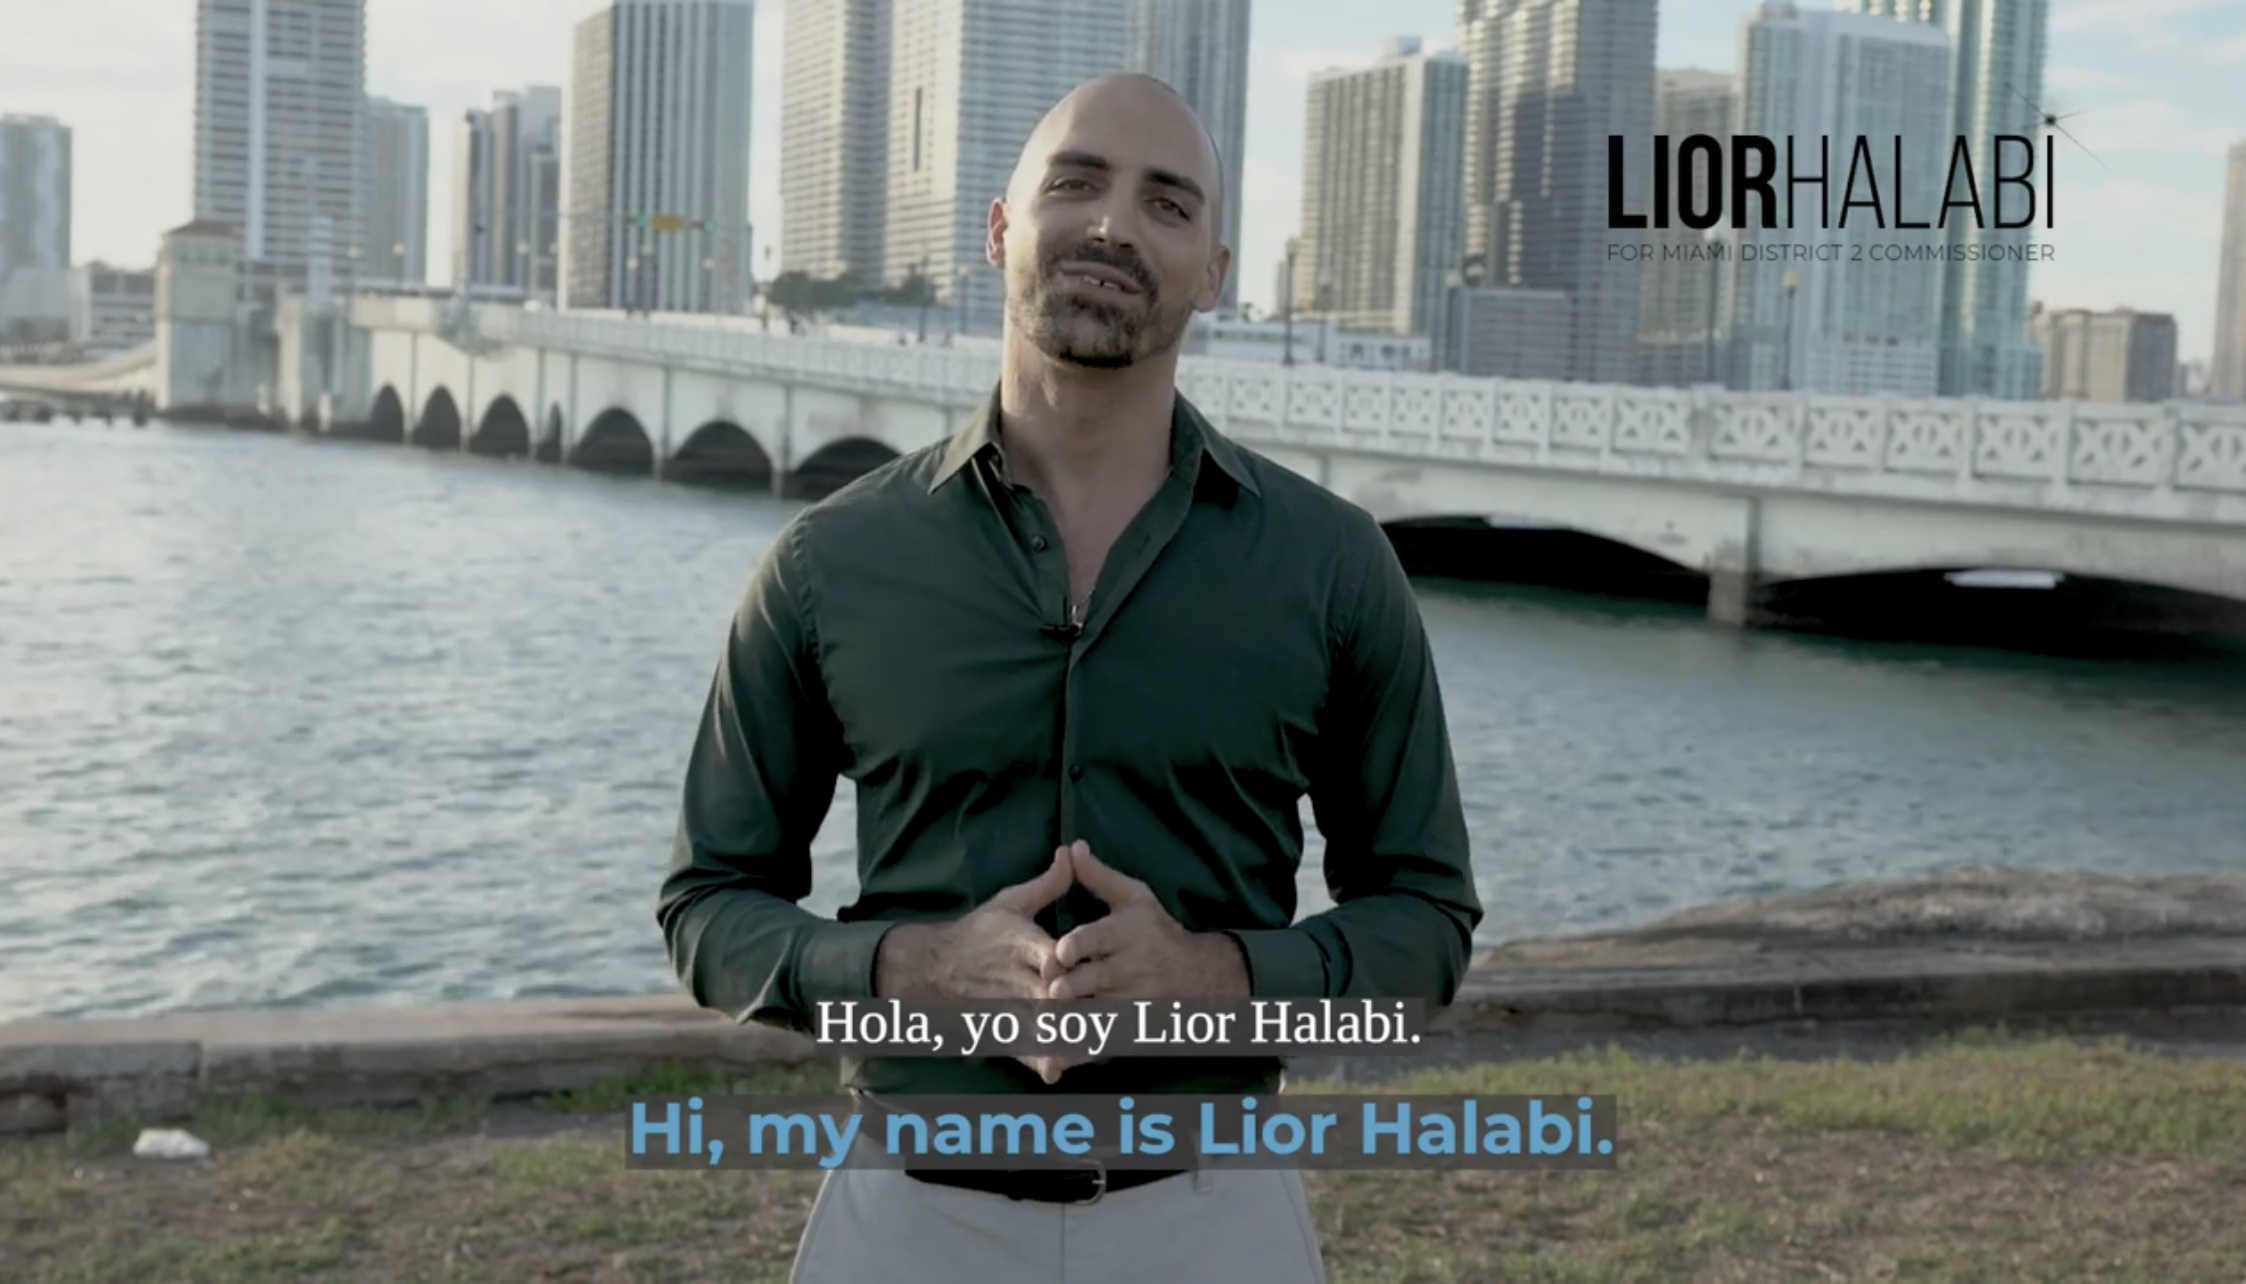 Lior Halabi Spanish speaking message supporting immigrant